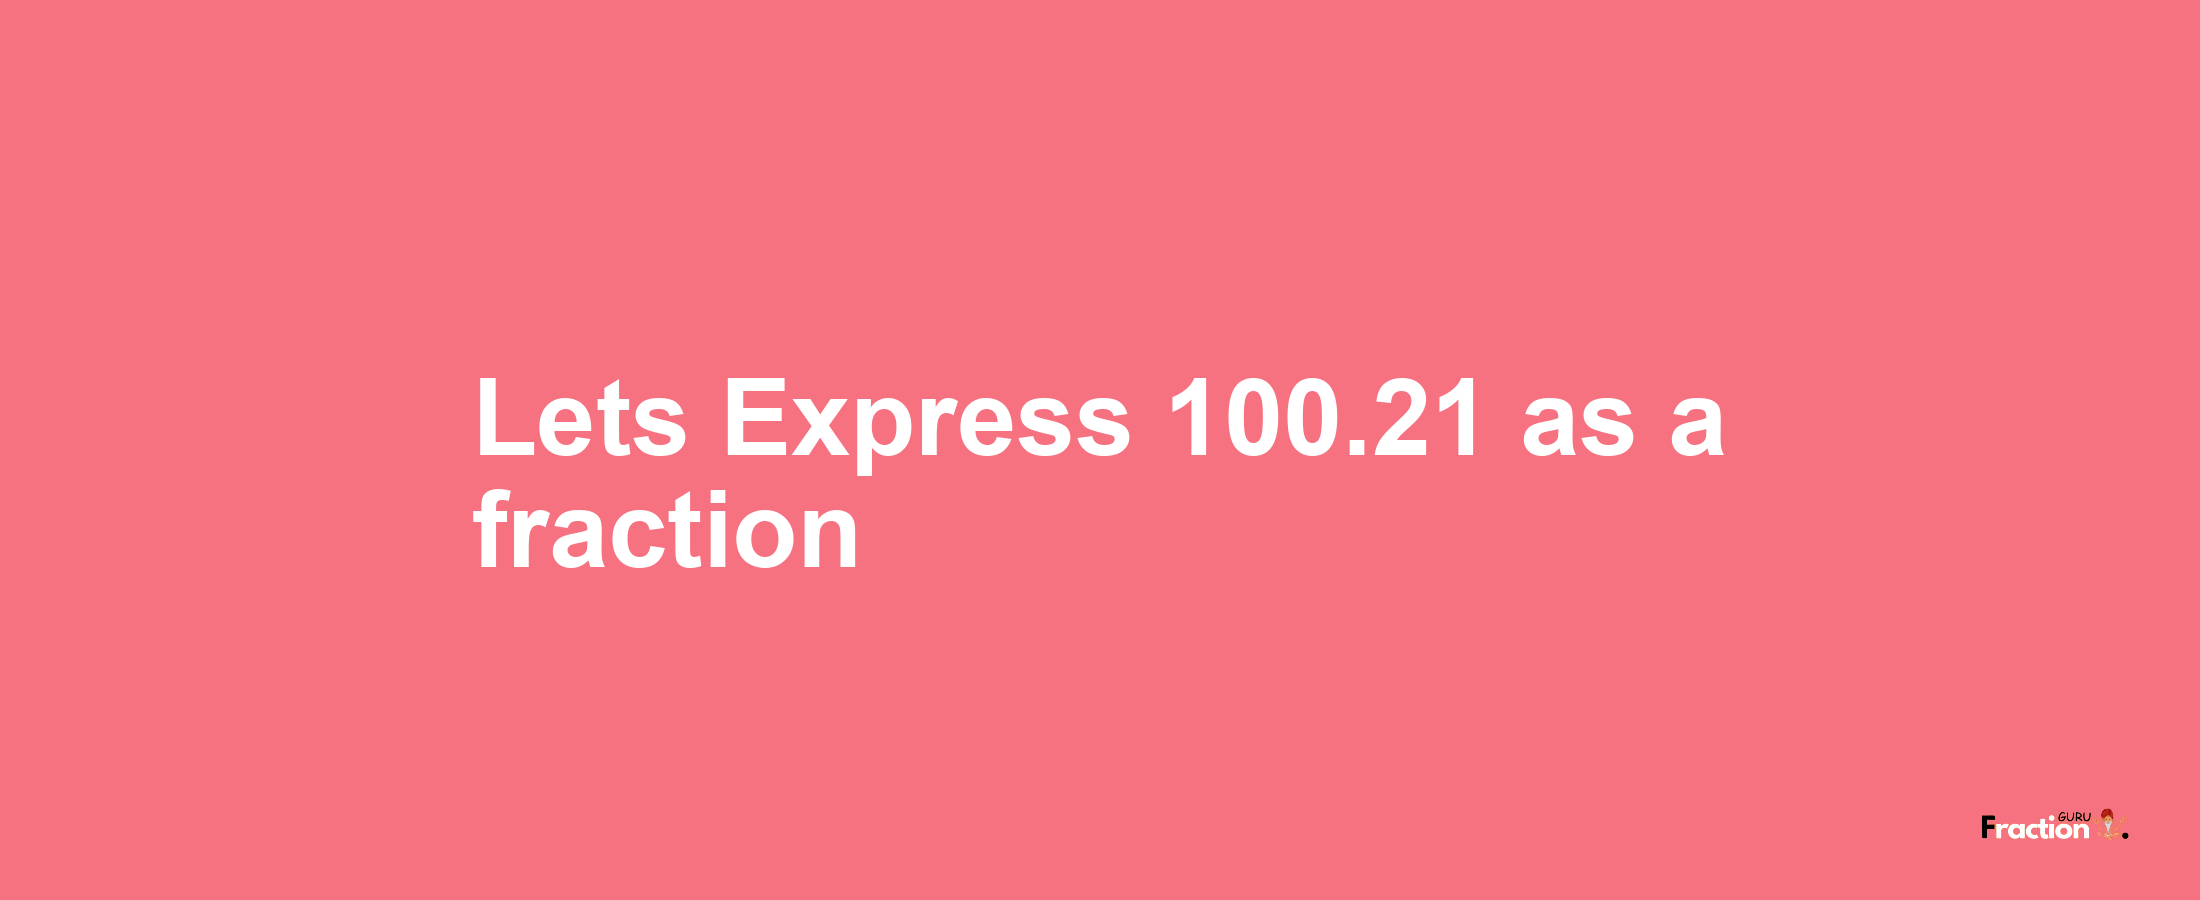 Lets Express 100.21 as afraction